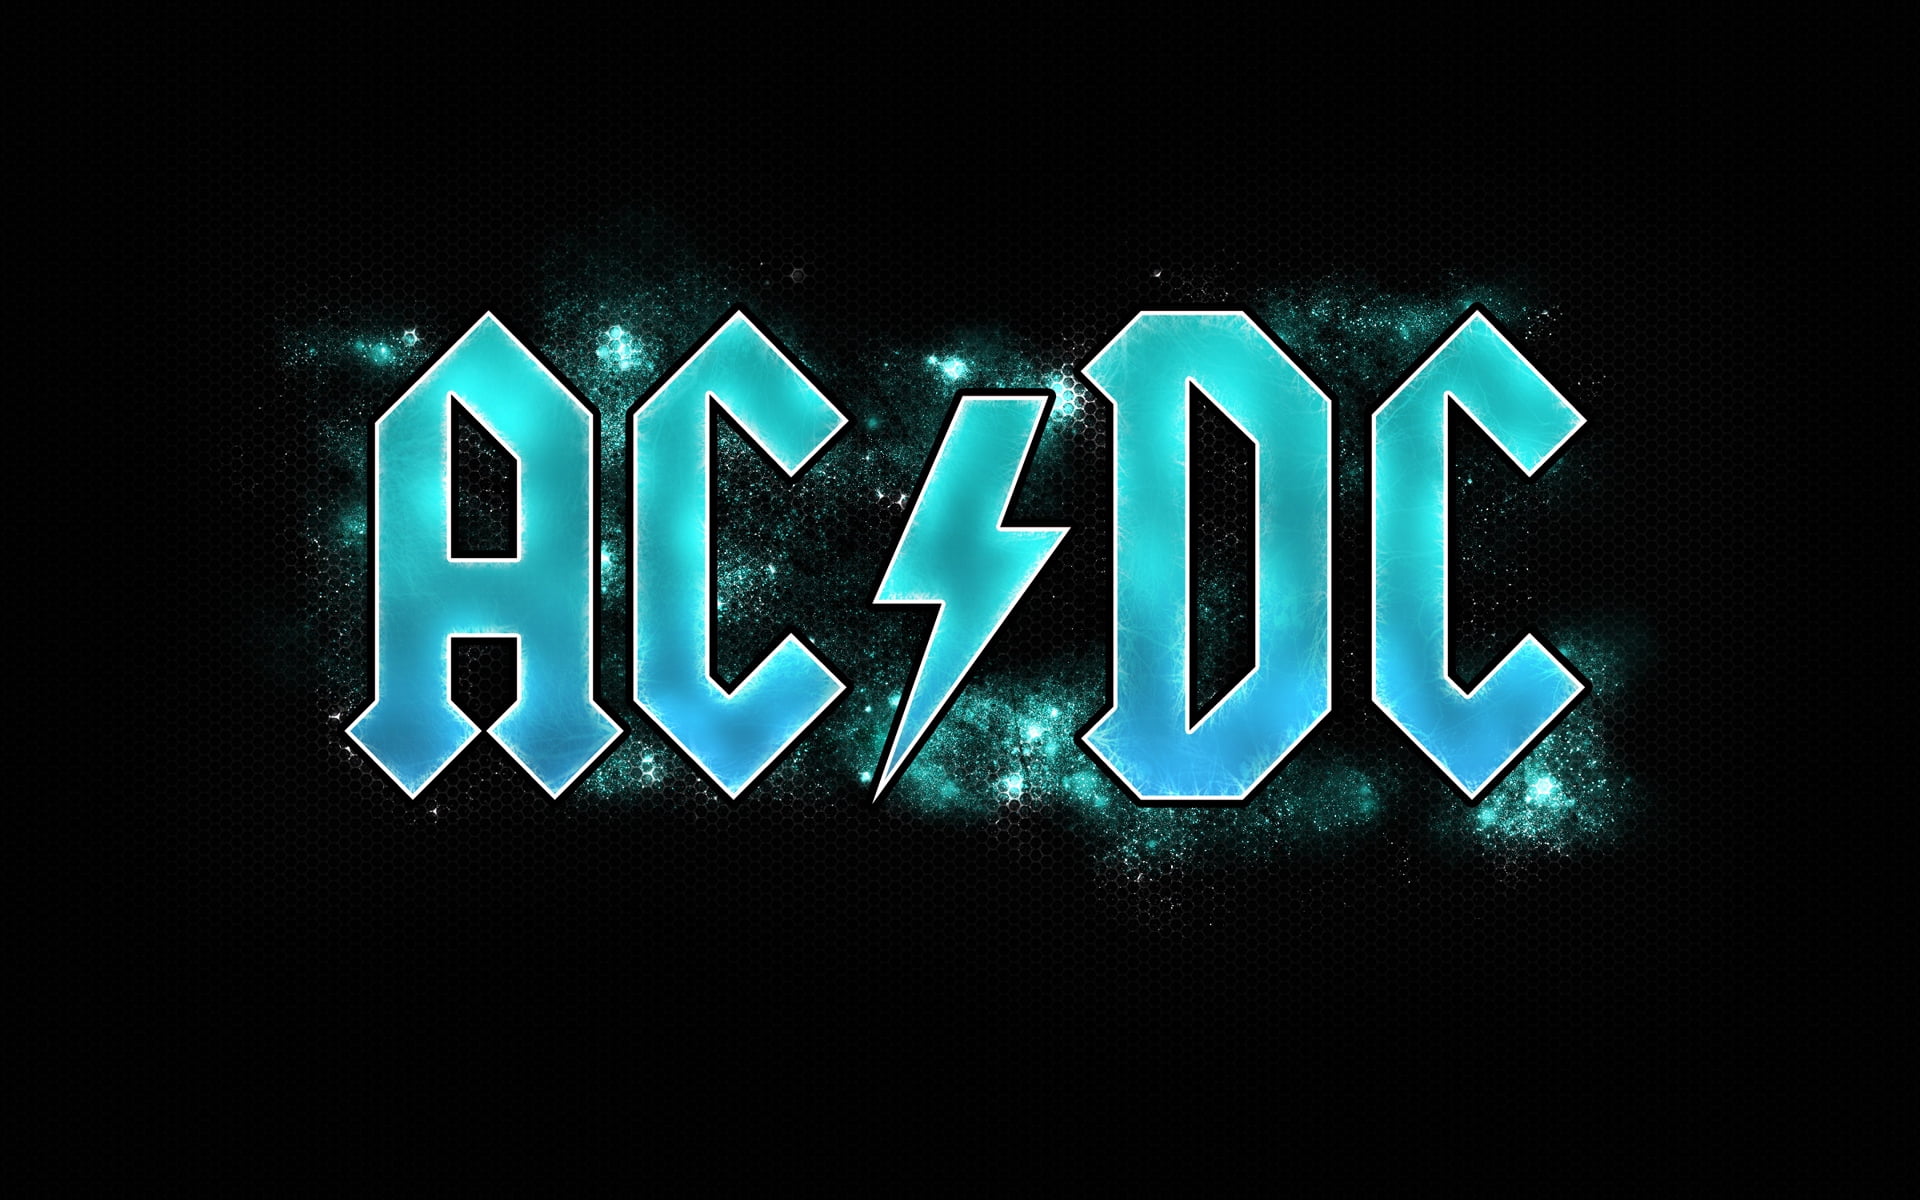 Free Download Hd Wallpaper Ac Dc Logo Acdc Graphics Background Font Light Glowing Wallpaper Flare